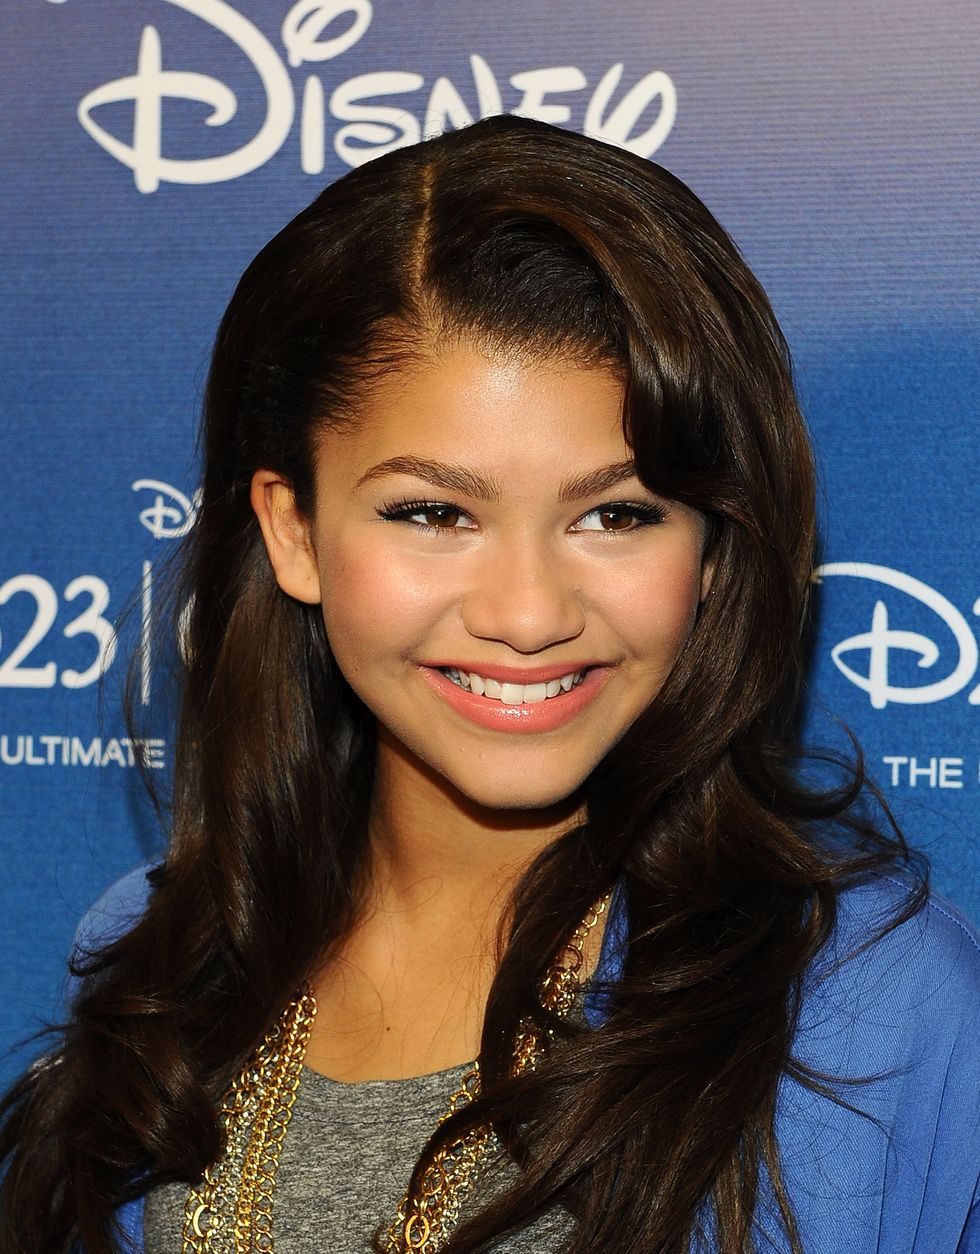 anaheim, ca   august 21  actress zendaya coleman arrives for the "shake it up" panel during disney's d23 expo 2011 at the anaheim convention center on august 21, 2011 in anaheim, california  photo by michael bucknergetty images